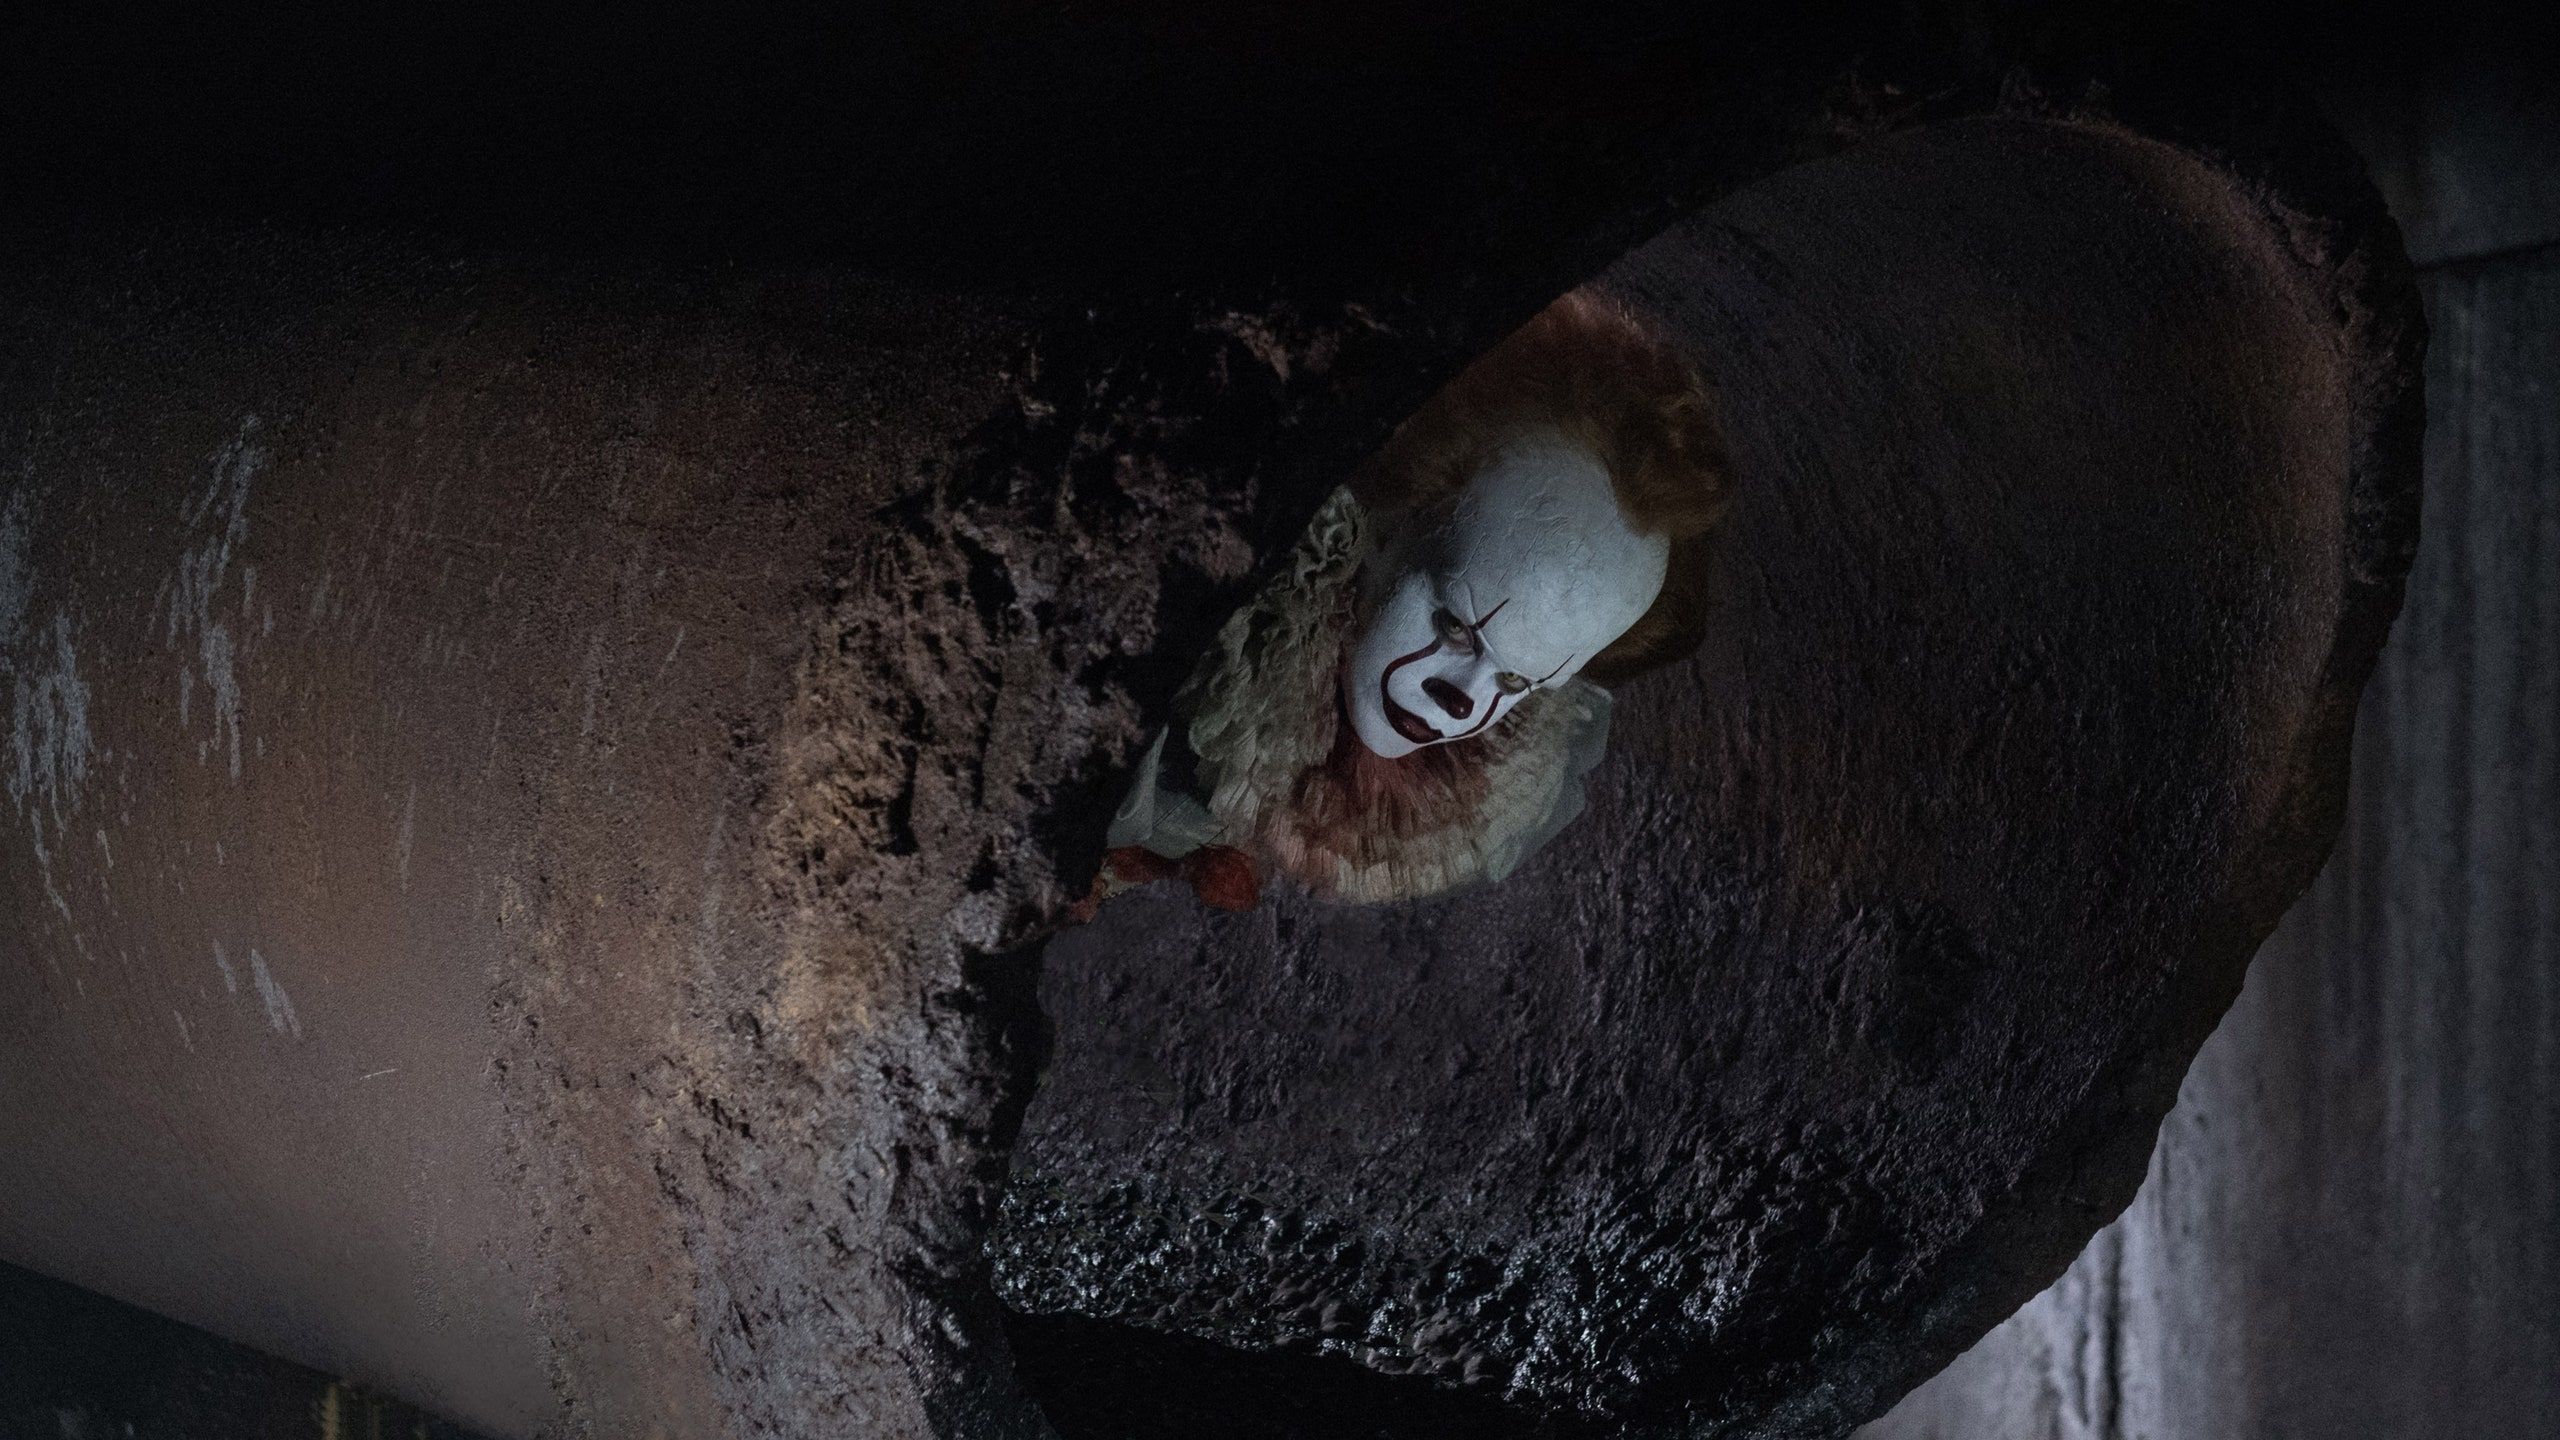 Real Clowns Claim the It Movie Is Making Them Lose Work